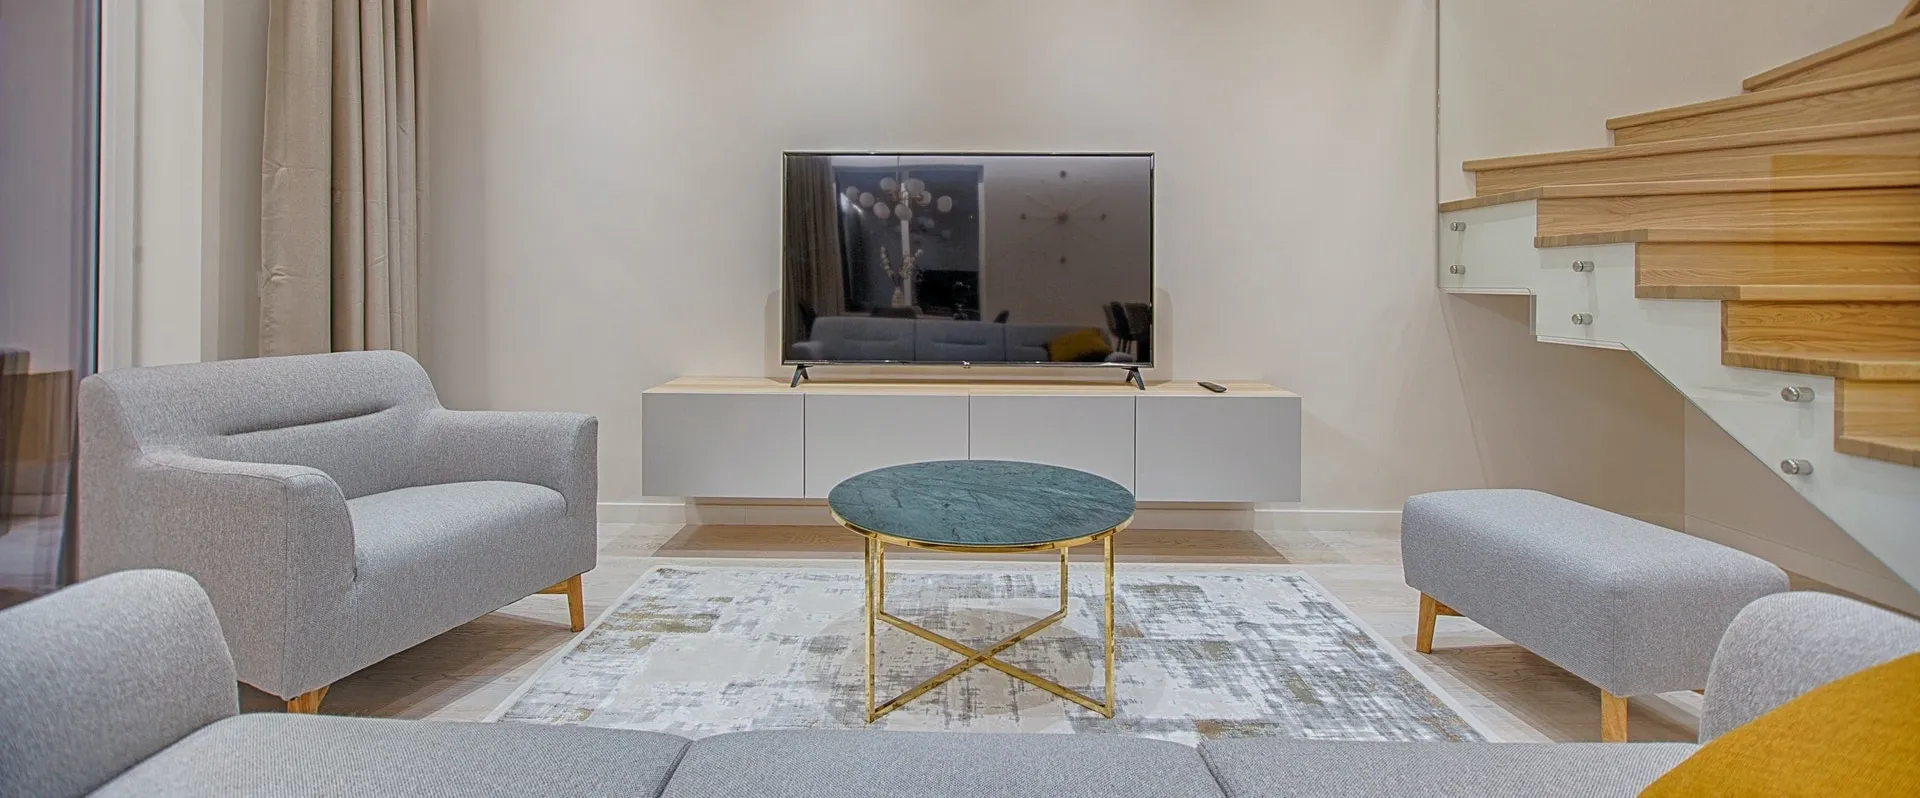 A living room with a table and tv on the wall